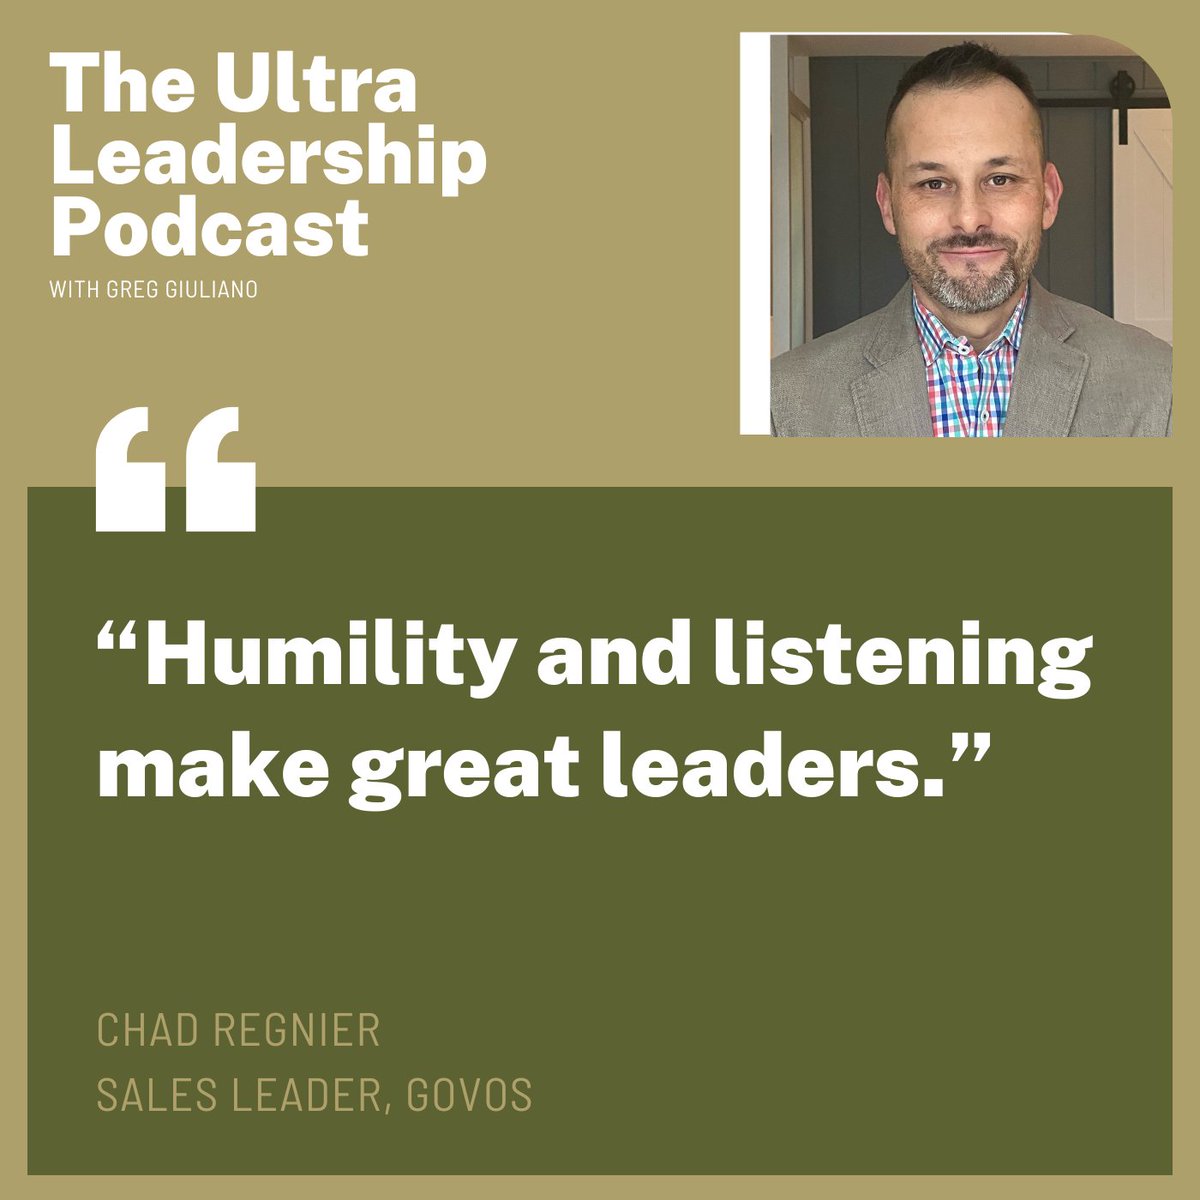 From Sales Guy to Sales Leader is a don't-miss episode of the #UltraLeadership podcast. 

Subscribe. Listen. Review. Share.  Thanks!

ultraleadership.com/podcast-2/

=#executivecoaching #leadershipdevelopment #teams #mindfulness #author #leadchange #podcast #sales